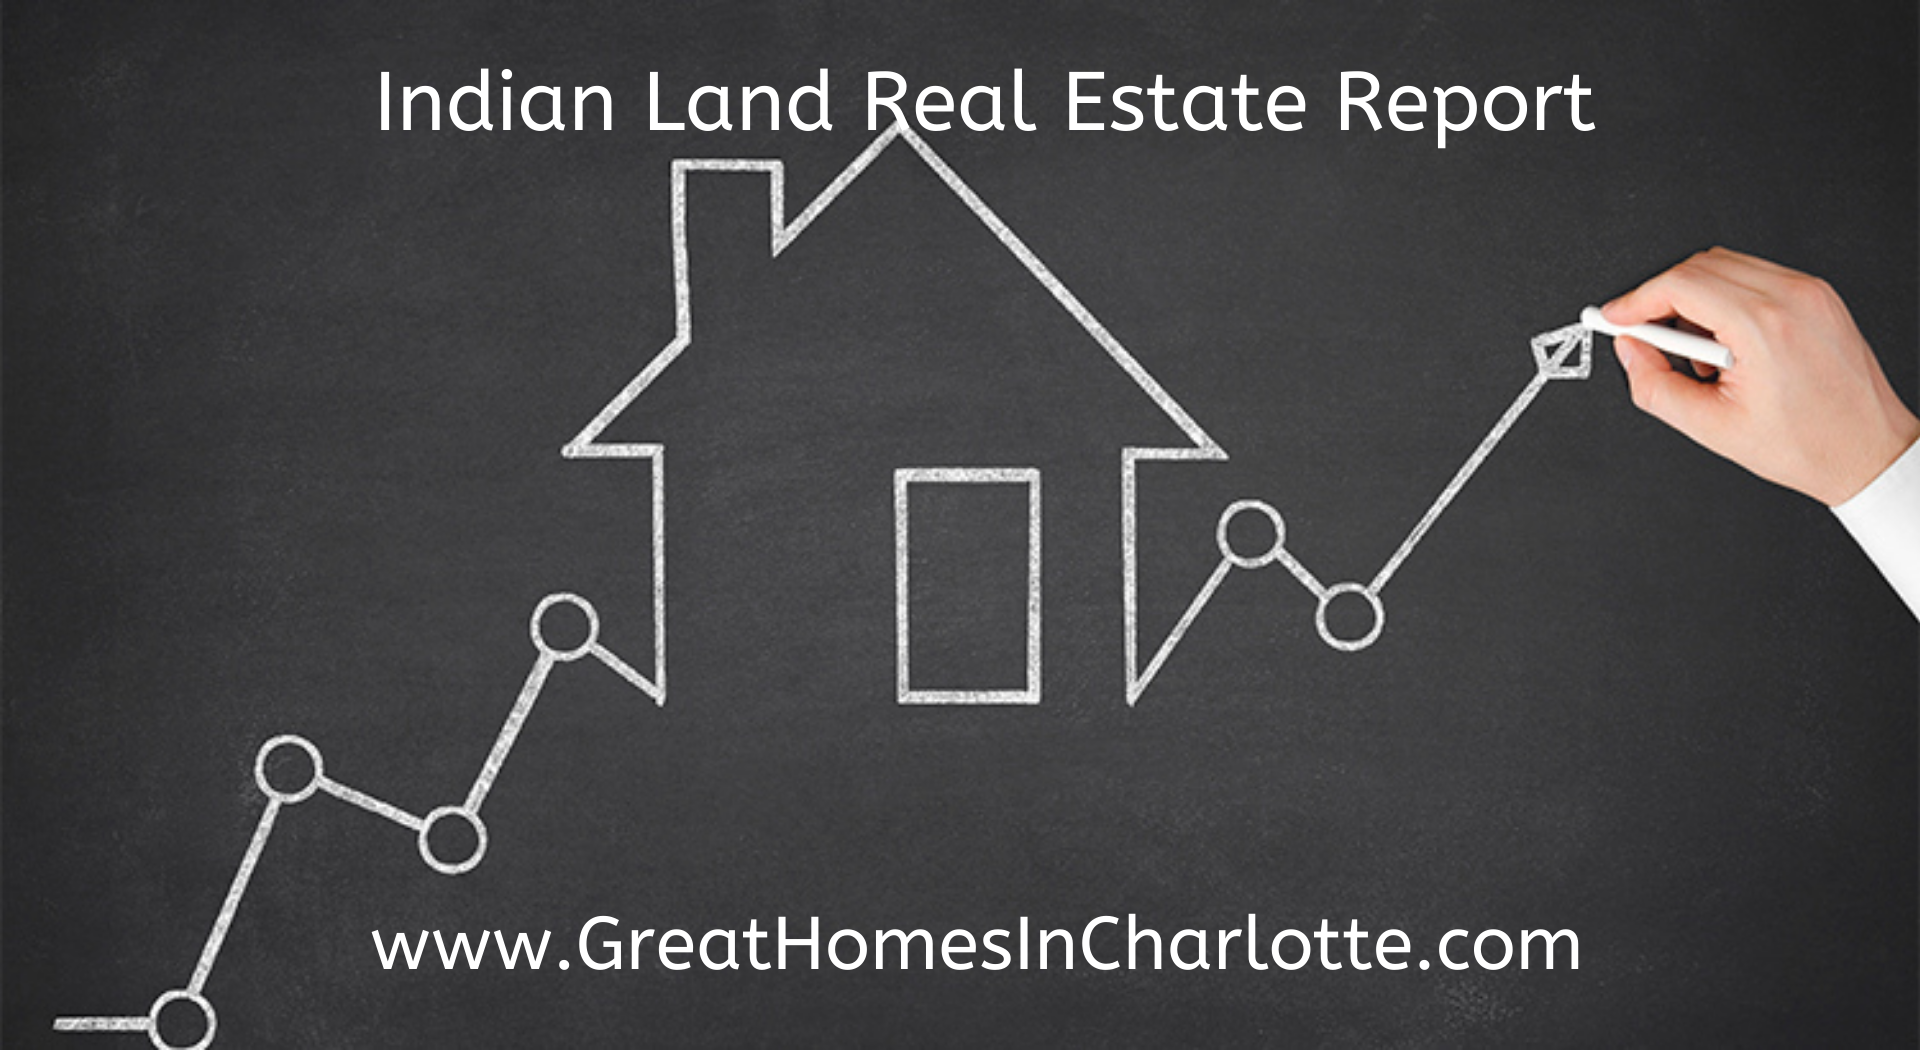 Indian_Land_Real_Estate_Report.png